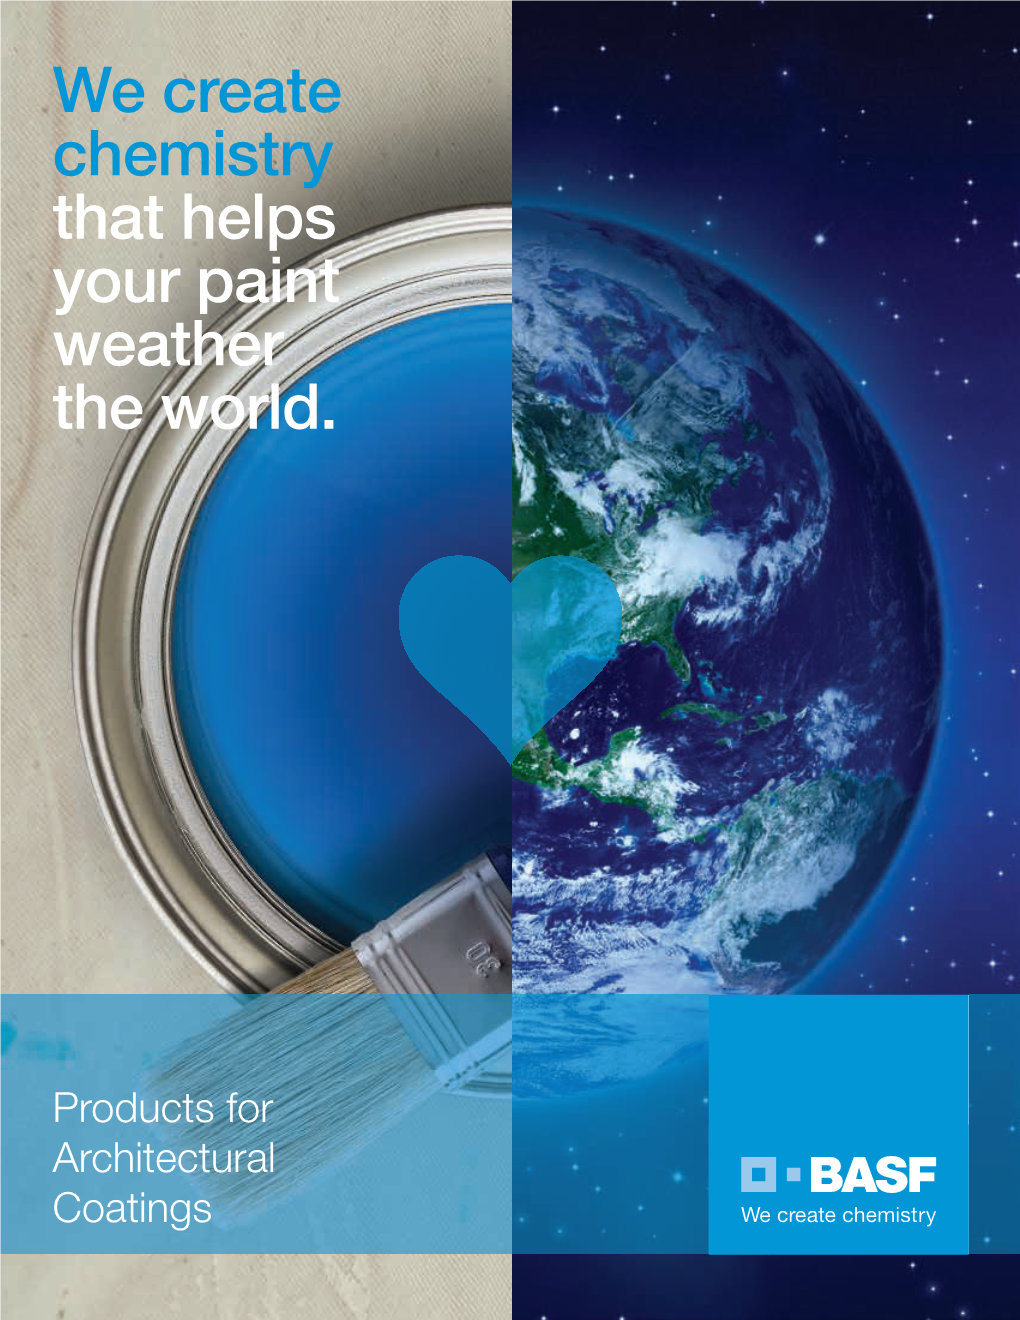 We Create Chemistry That Helps Your Paint Weather the World